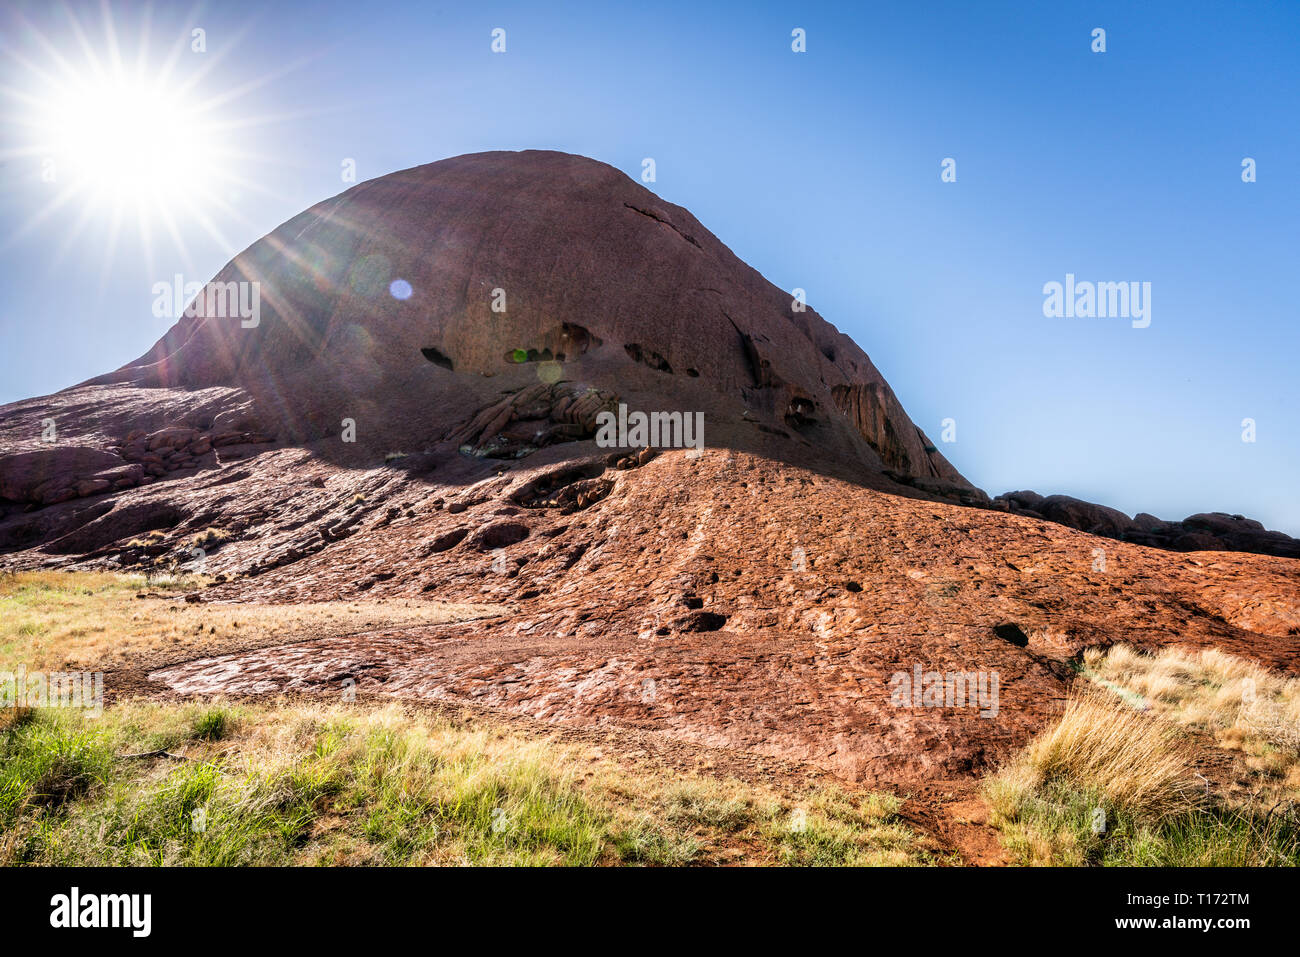 View of Kuniya Piti giant red rock during the Lungkata walk in NT outback Australia Stock Photo